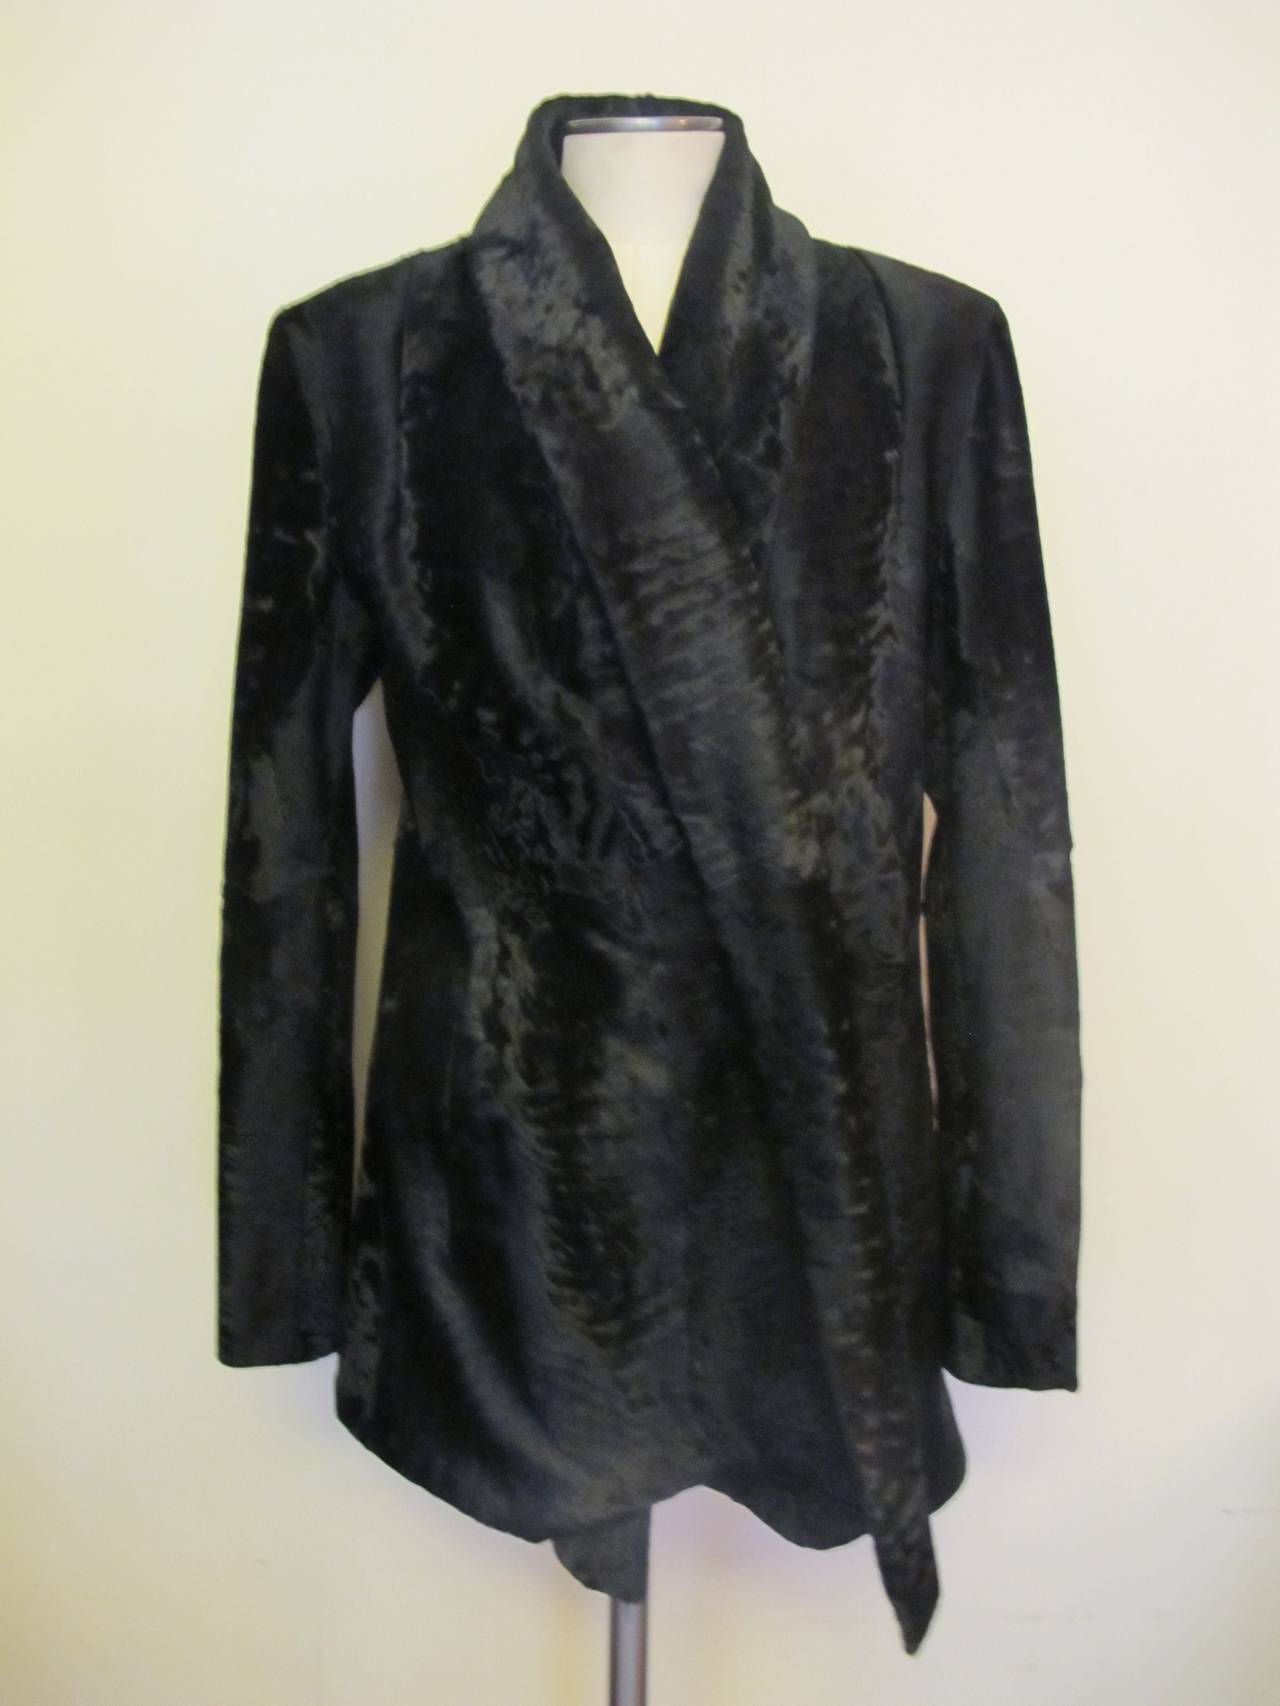 Giuliana Teso Black Broadtail Jacket for Neiman Marcus In Excellent Condition For Sale In San Francisco, CA